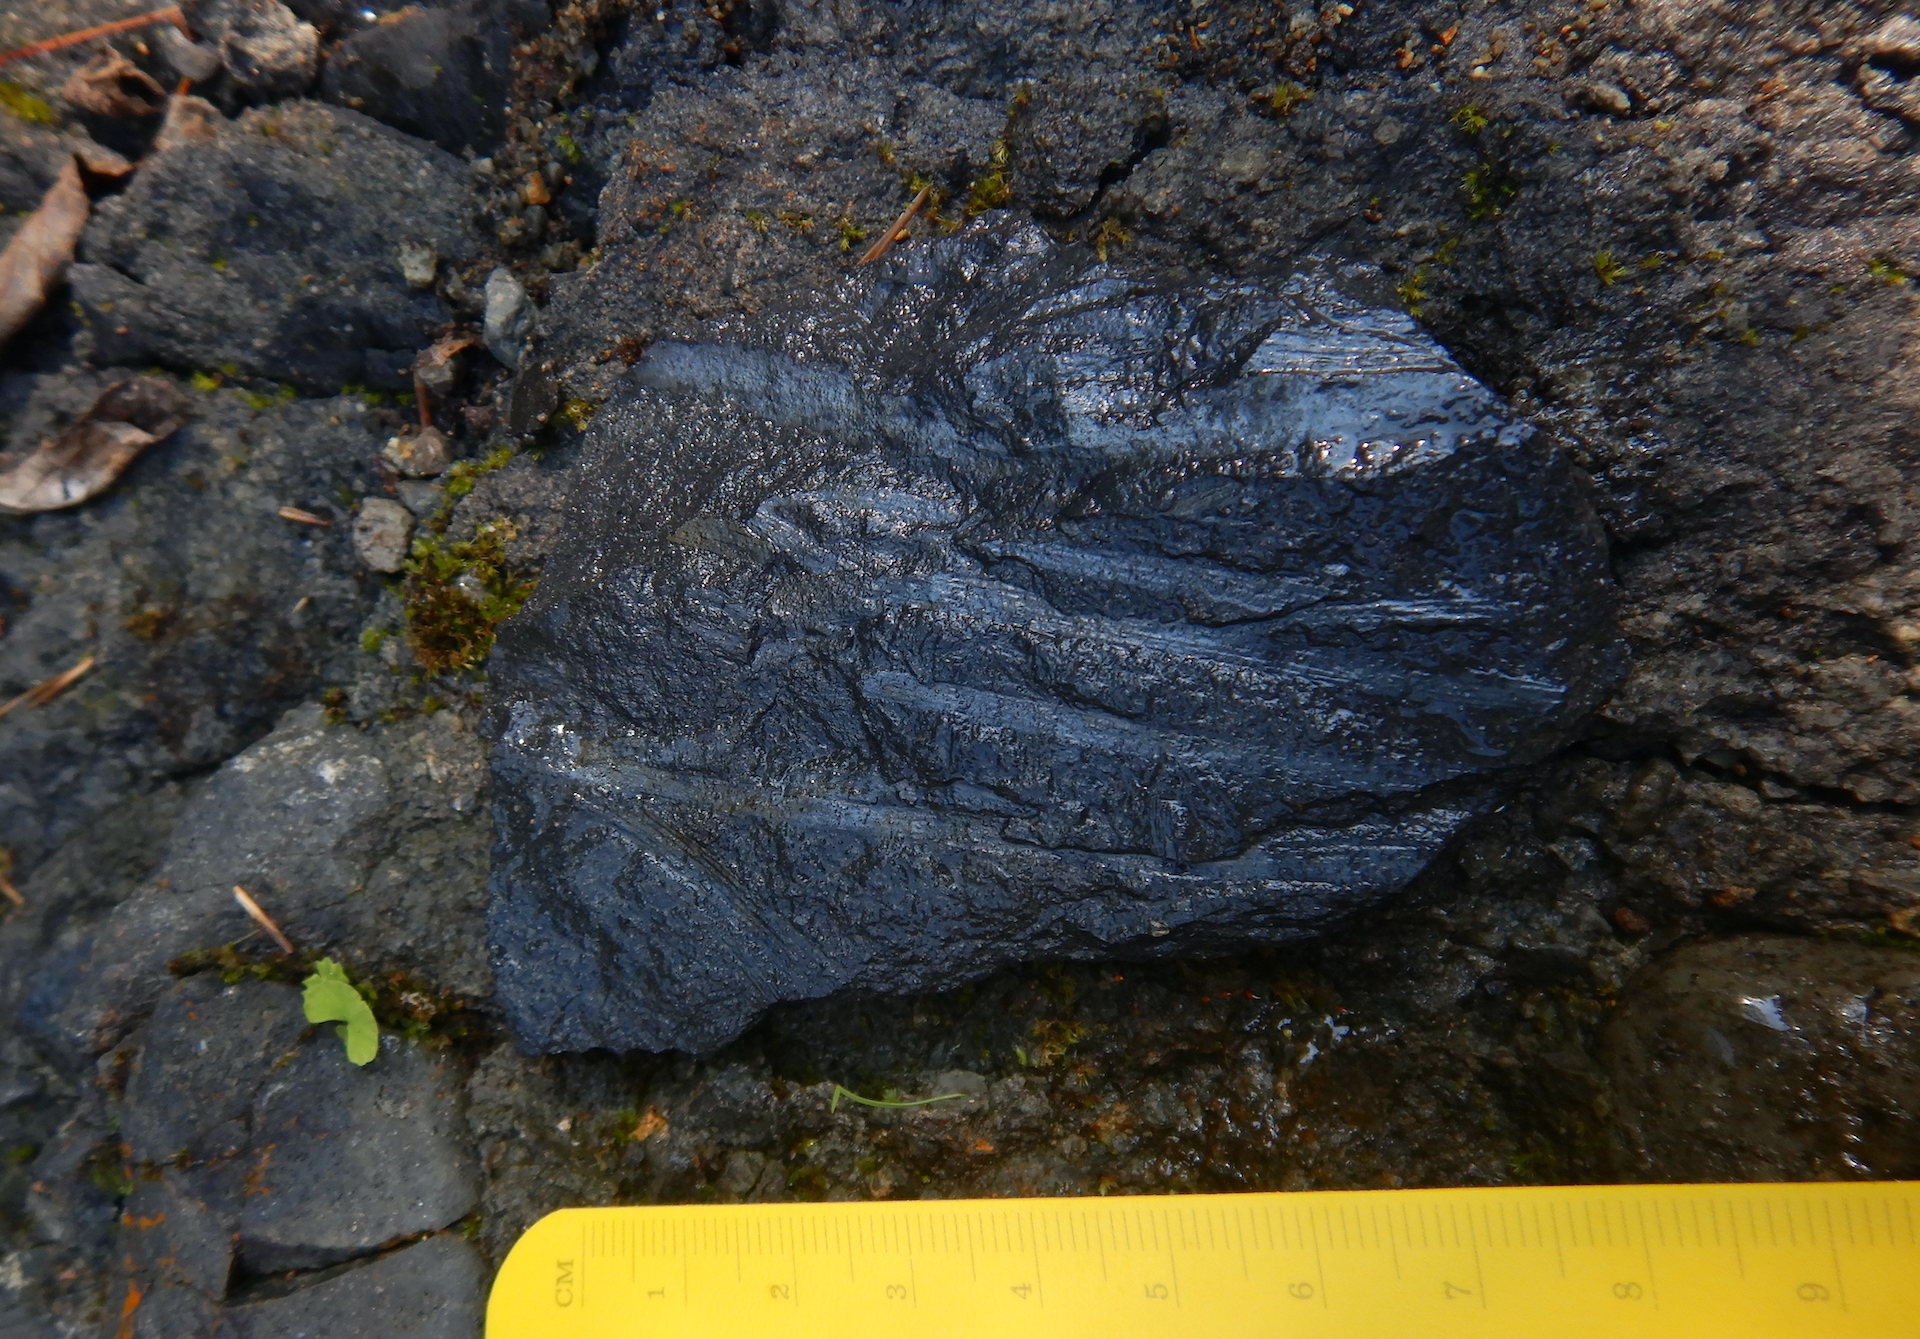 Rock containing plant fossils. The fossils are roughly parallel in the rock and trend horizontally in the photo. The rock with the fossils rests on other rocks. The scale at bottom is about 9 centimeters.